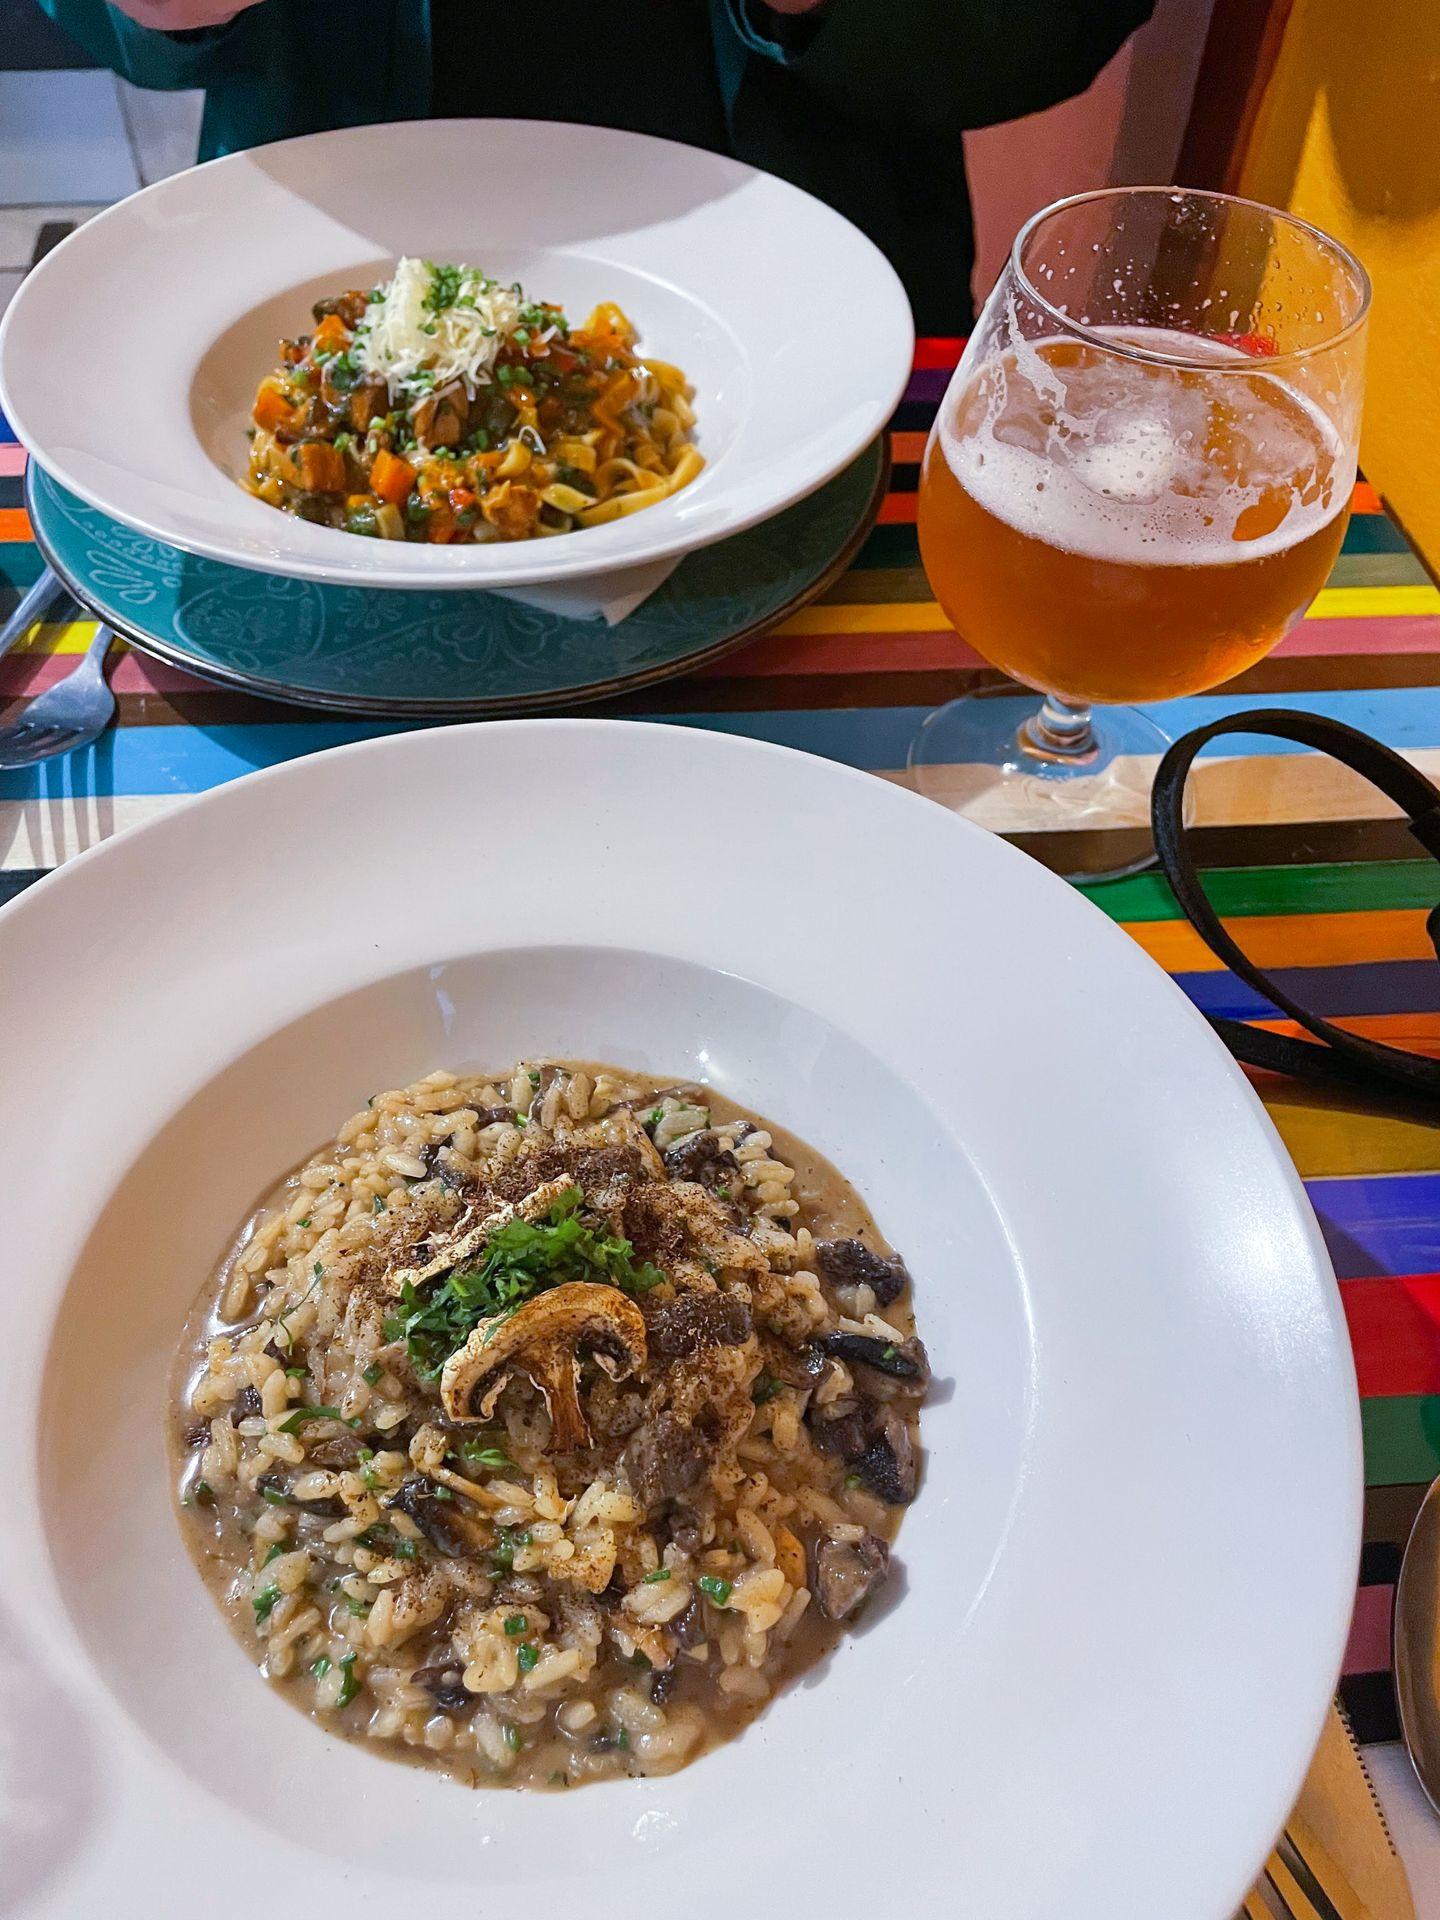 A large white bowl of mushroom risotto and another bowl of pasta across the table. There is also a large glass of beer.